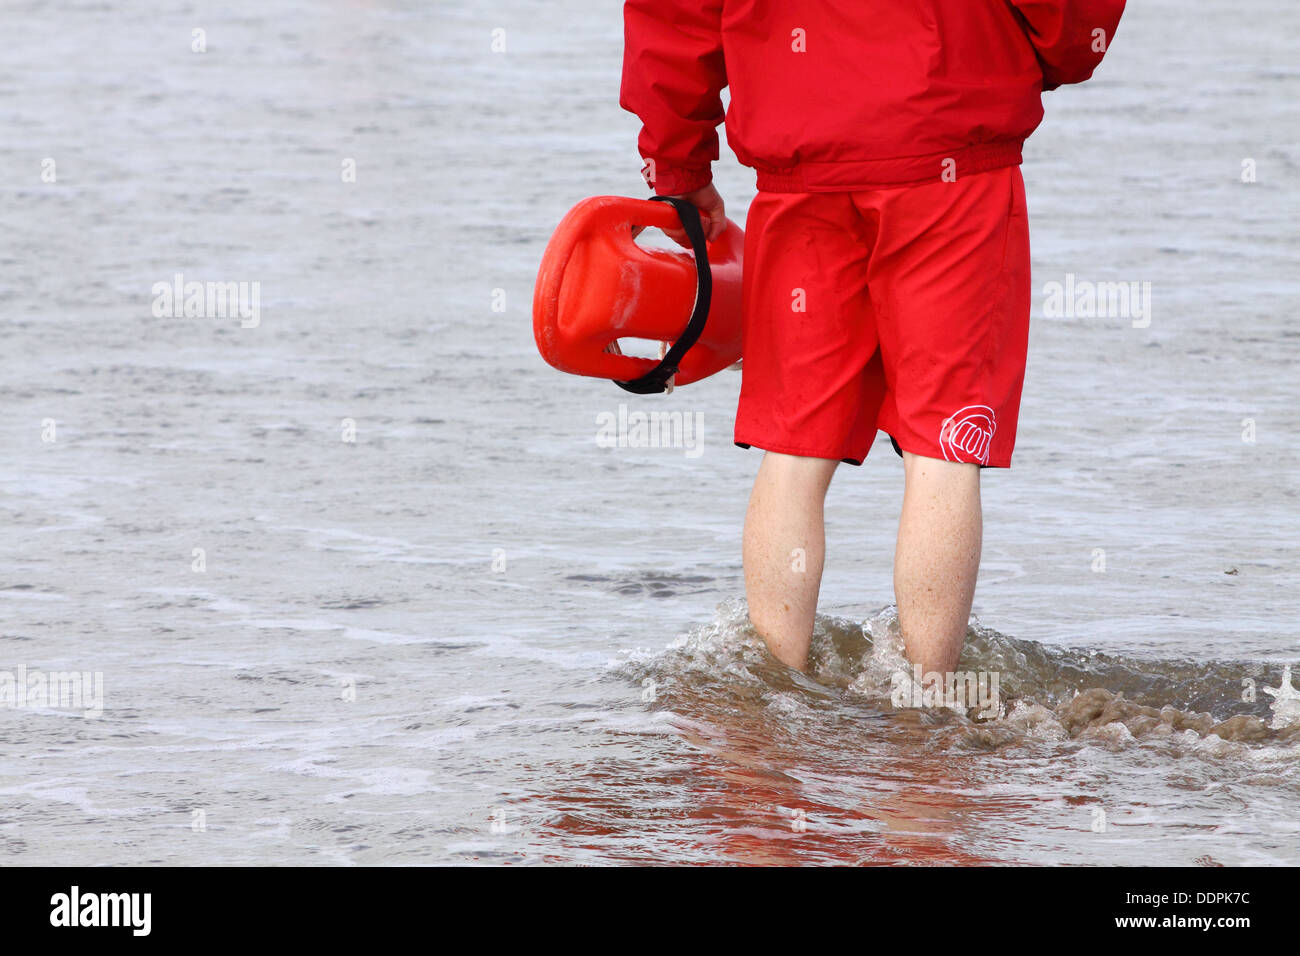 Lifeguard with rescue buoy standing in the sea at Enniscrone beach, Ireland Stock Photo